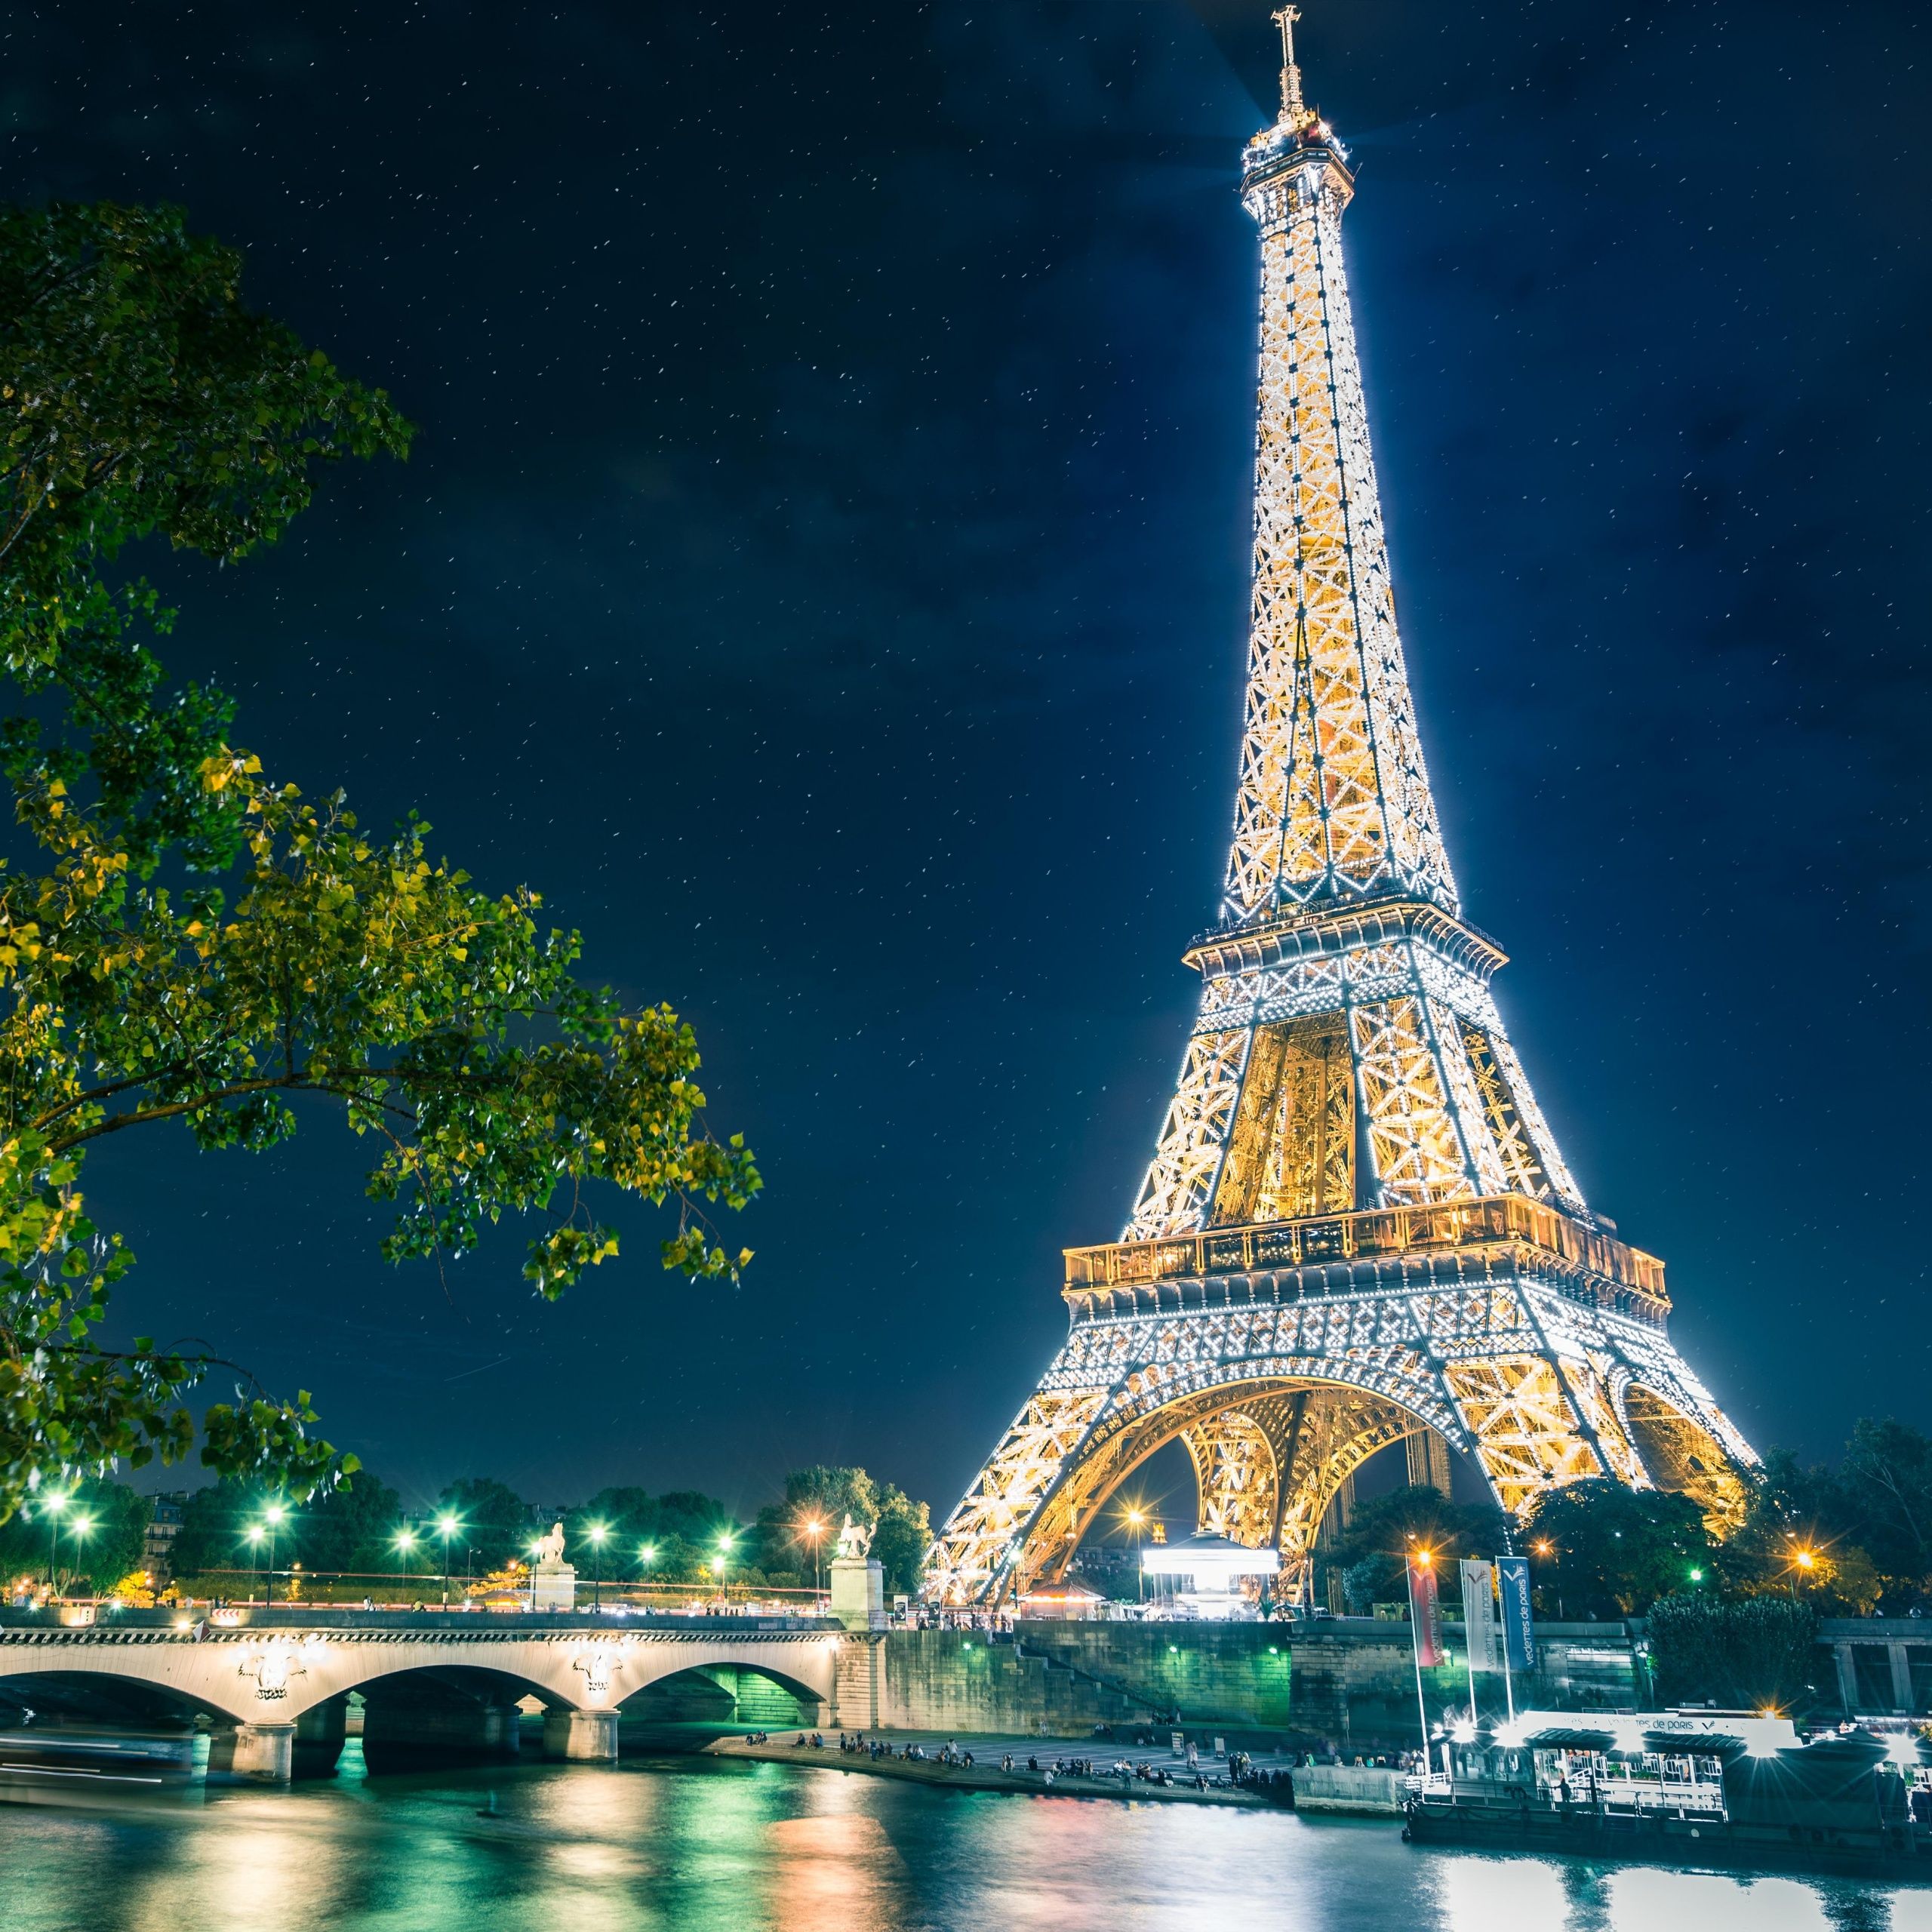 The eiffel tower is lit up at night - Eiffel Tower, Paris